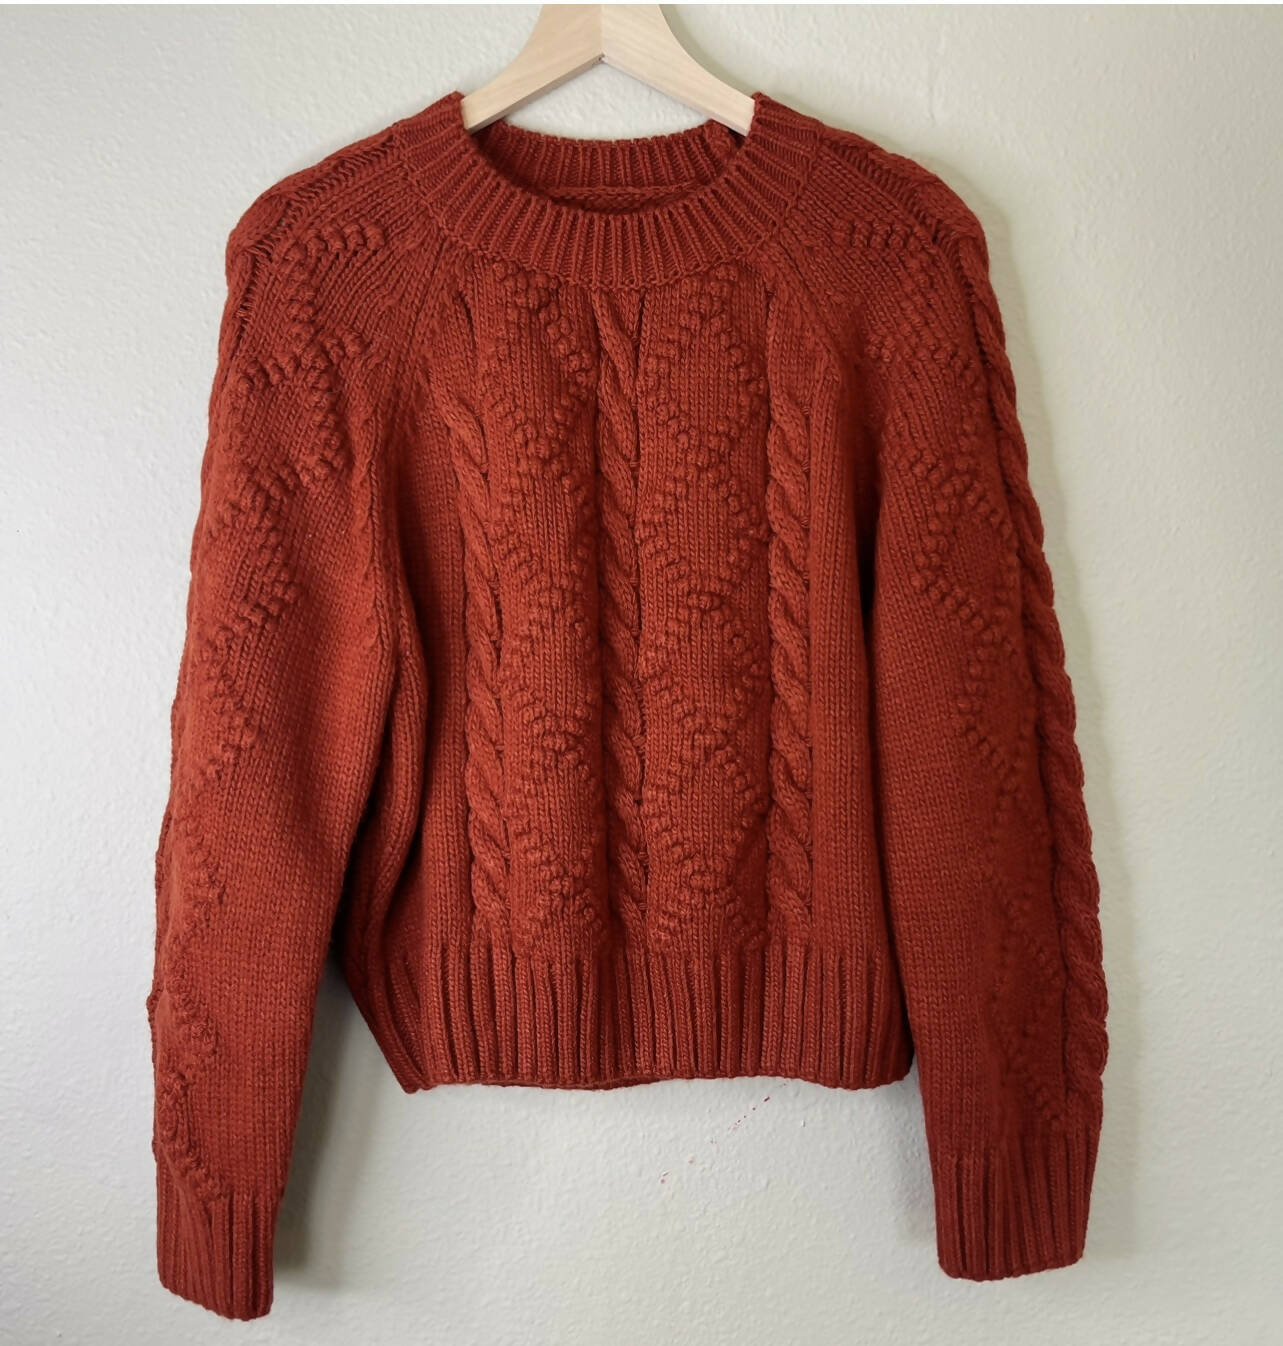 Classic Cable Knit Sweater (Maroon)